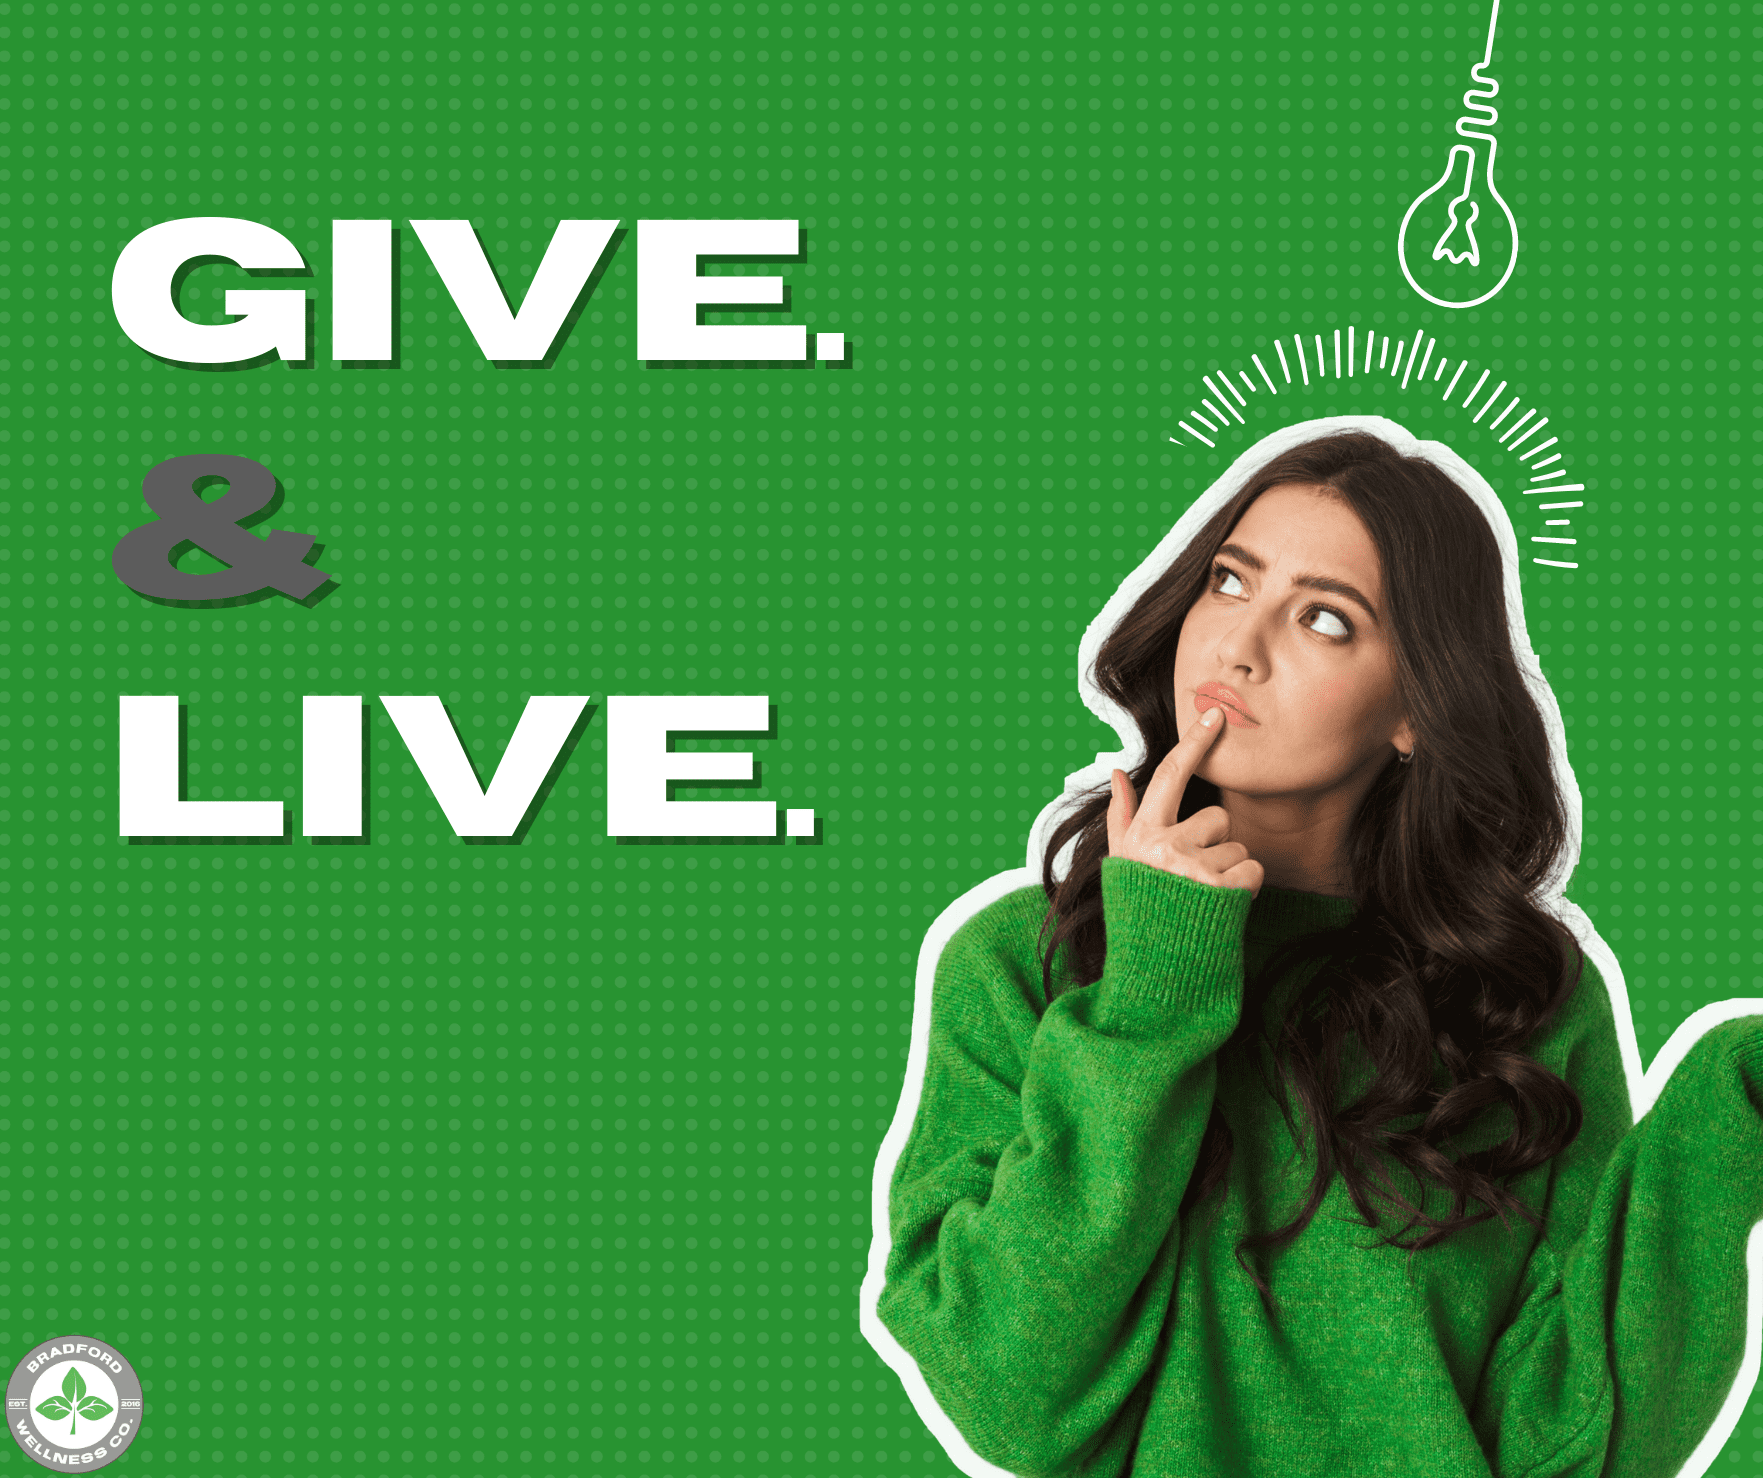 Featured image for “Give and Live”